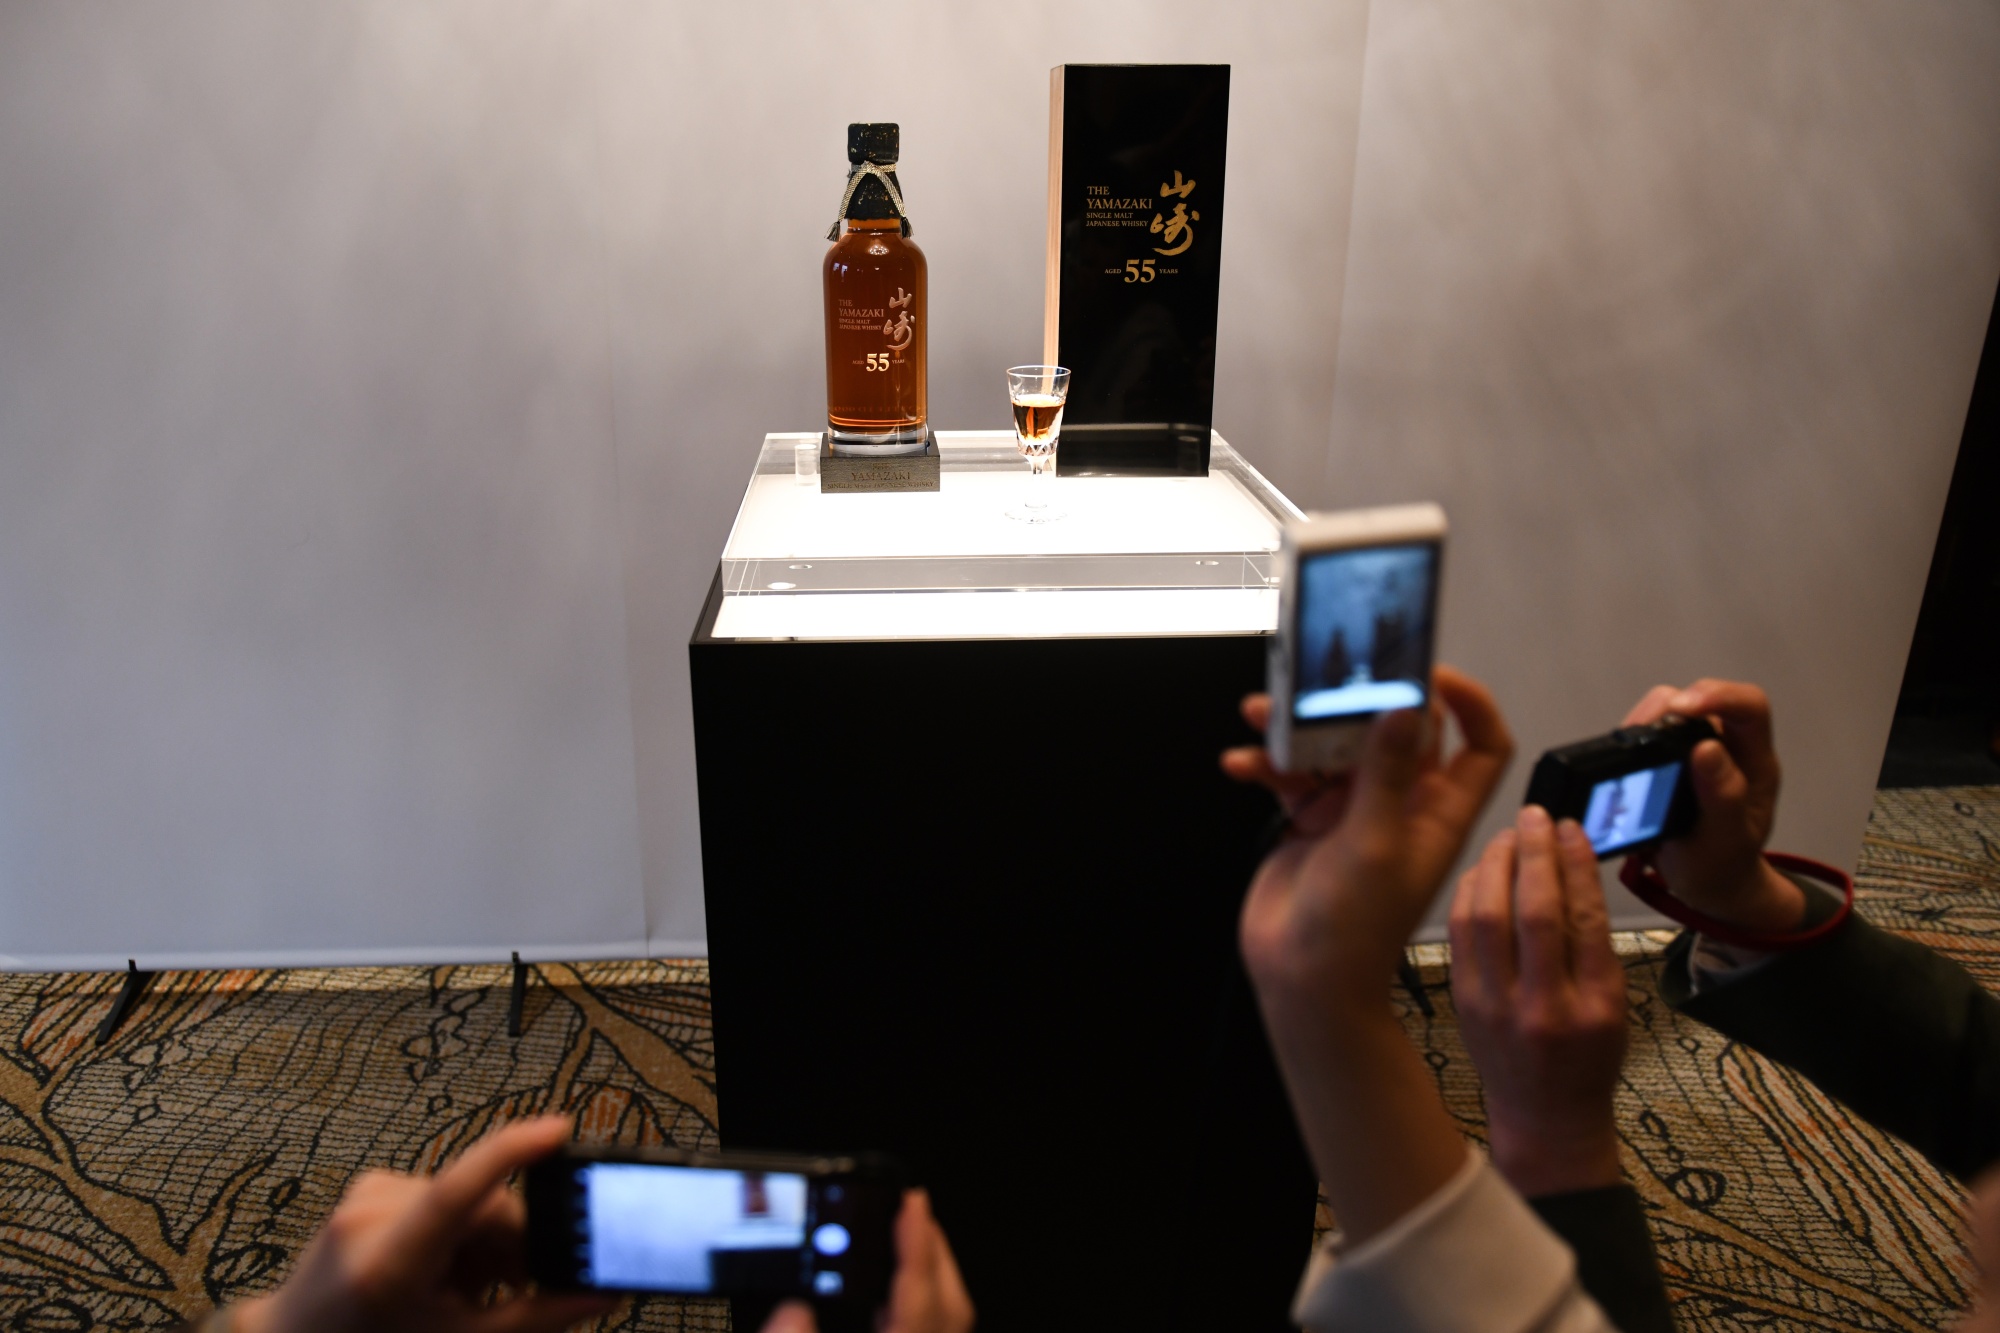 A bottle of the Yamazaki 55 single malt whiskey on display during a news conference in Tokyo on Jan. 30,.